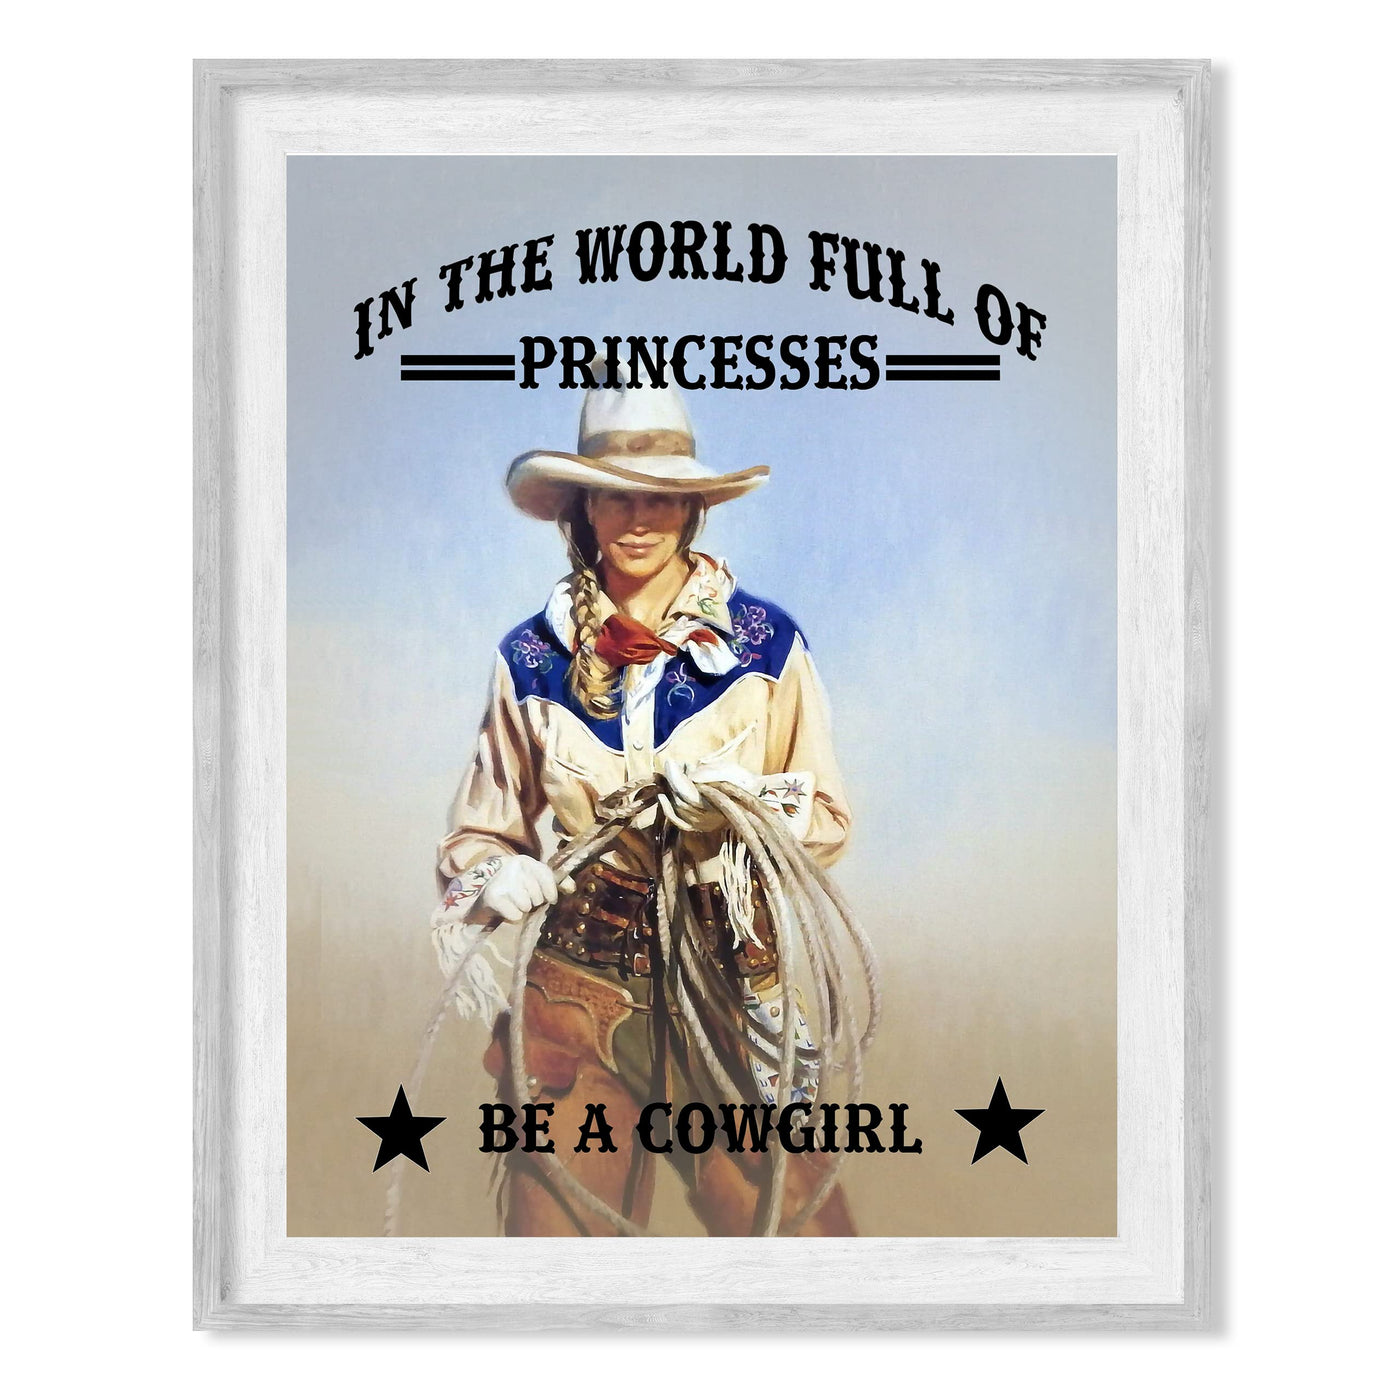 World Full of Princesses- Be a Cowgirl-Western Wall Art Sign -10 x 8" Woman Holding Rope Picture Print -Ready to Frame. Country Rustic Decor for Home-Lodge-Camp-Cabin. Great Gift for All Cowgirls!